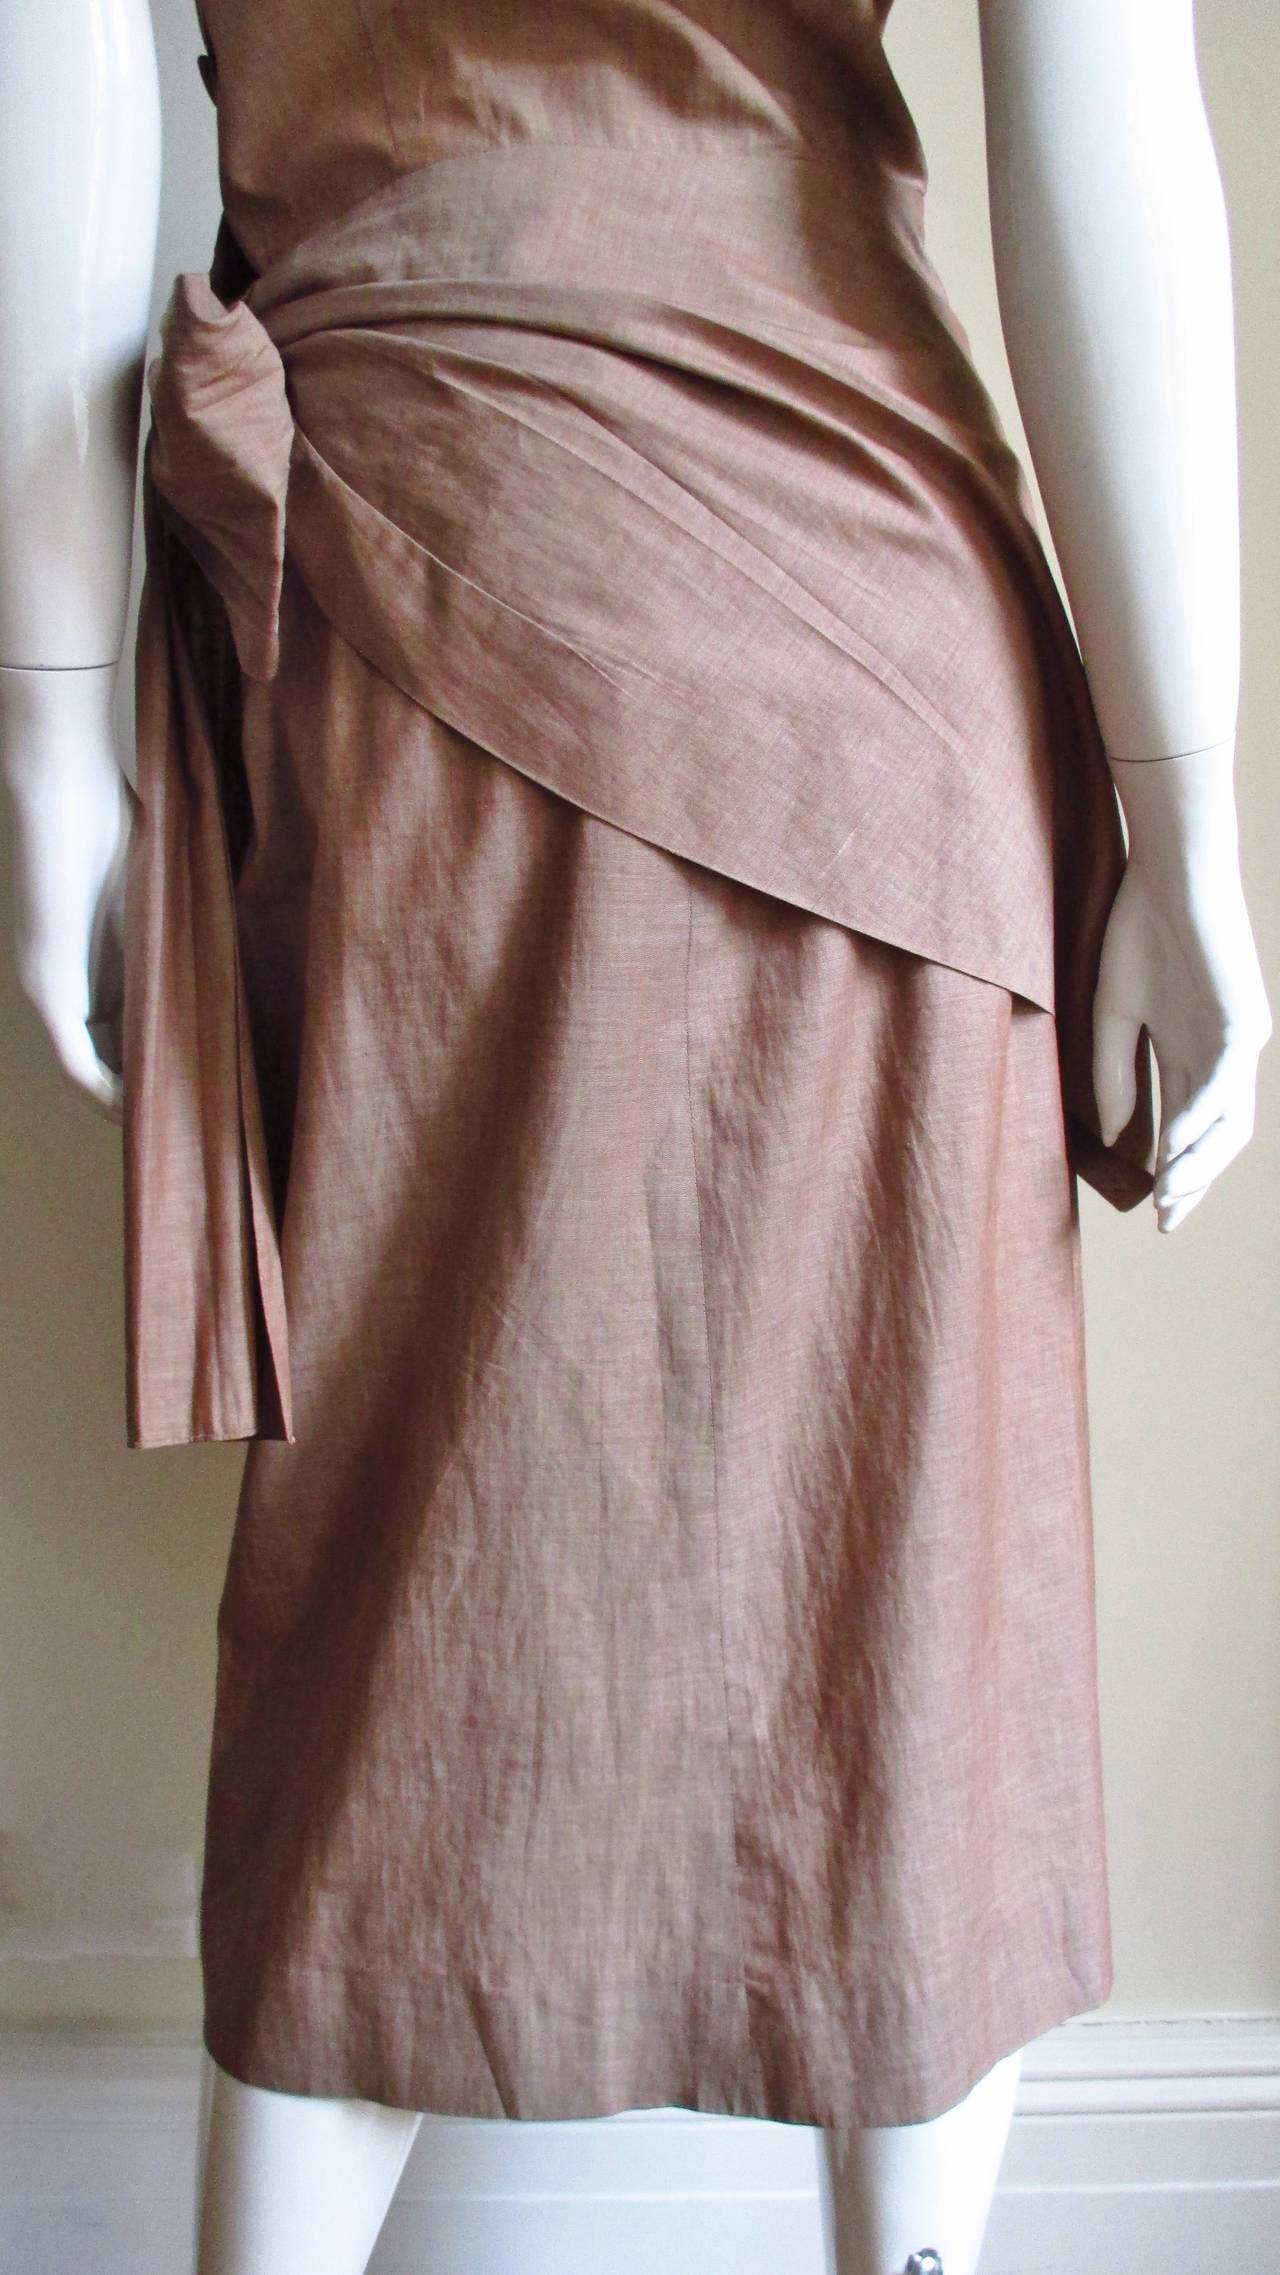  Adele Simpson 1940s Wrap Top and Skirt For Sale 6